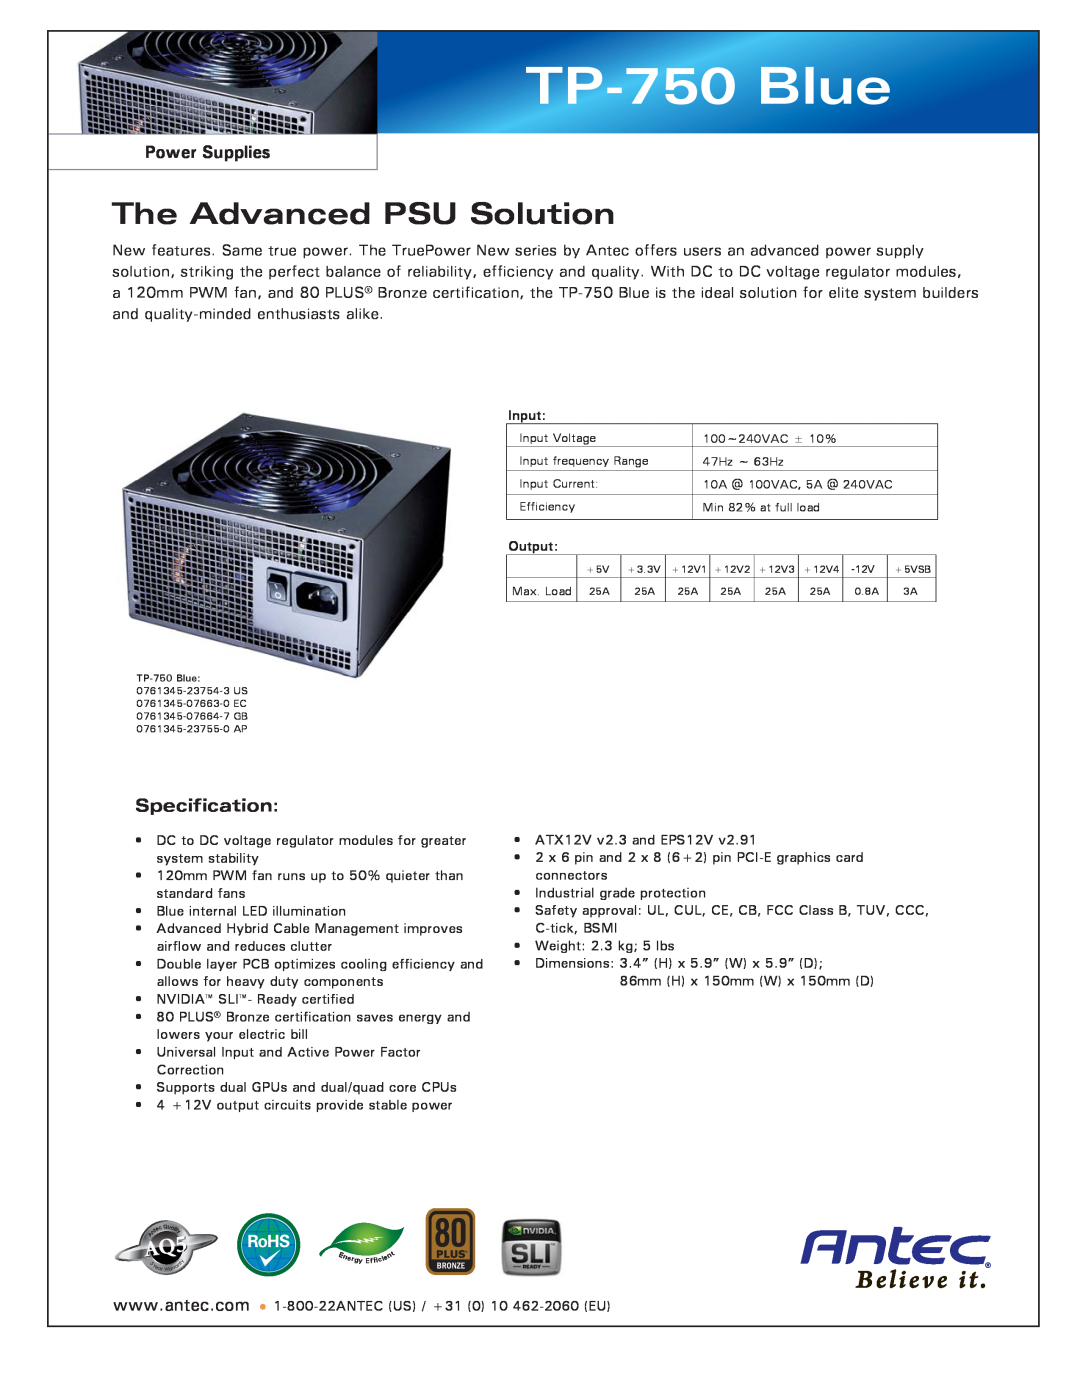 Antec TP-750 Blue dimensions The Advanced PSU Solution, Power Supplies, Specification, Input, Output 